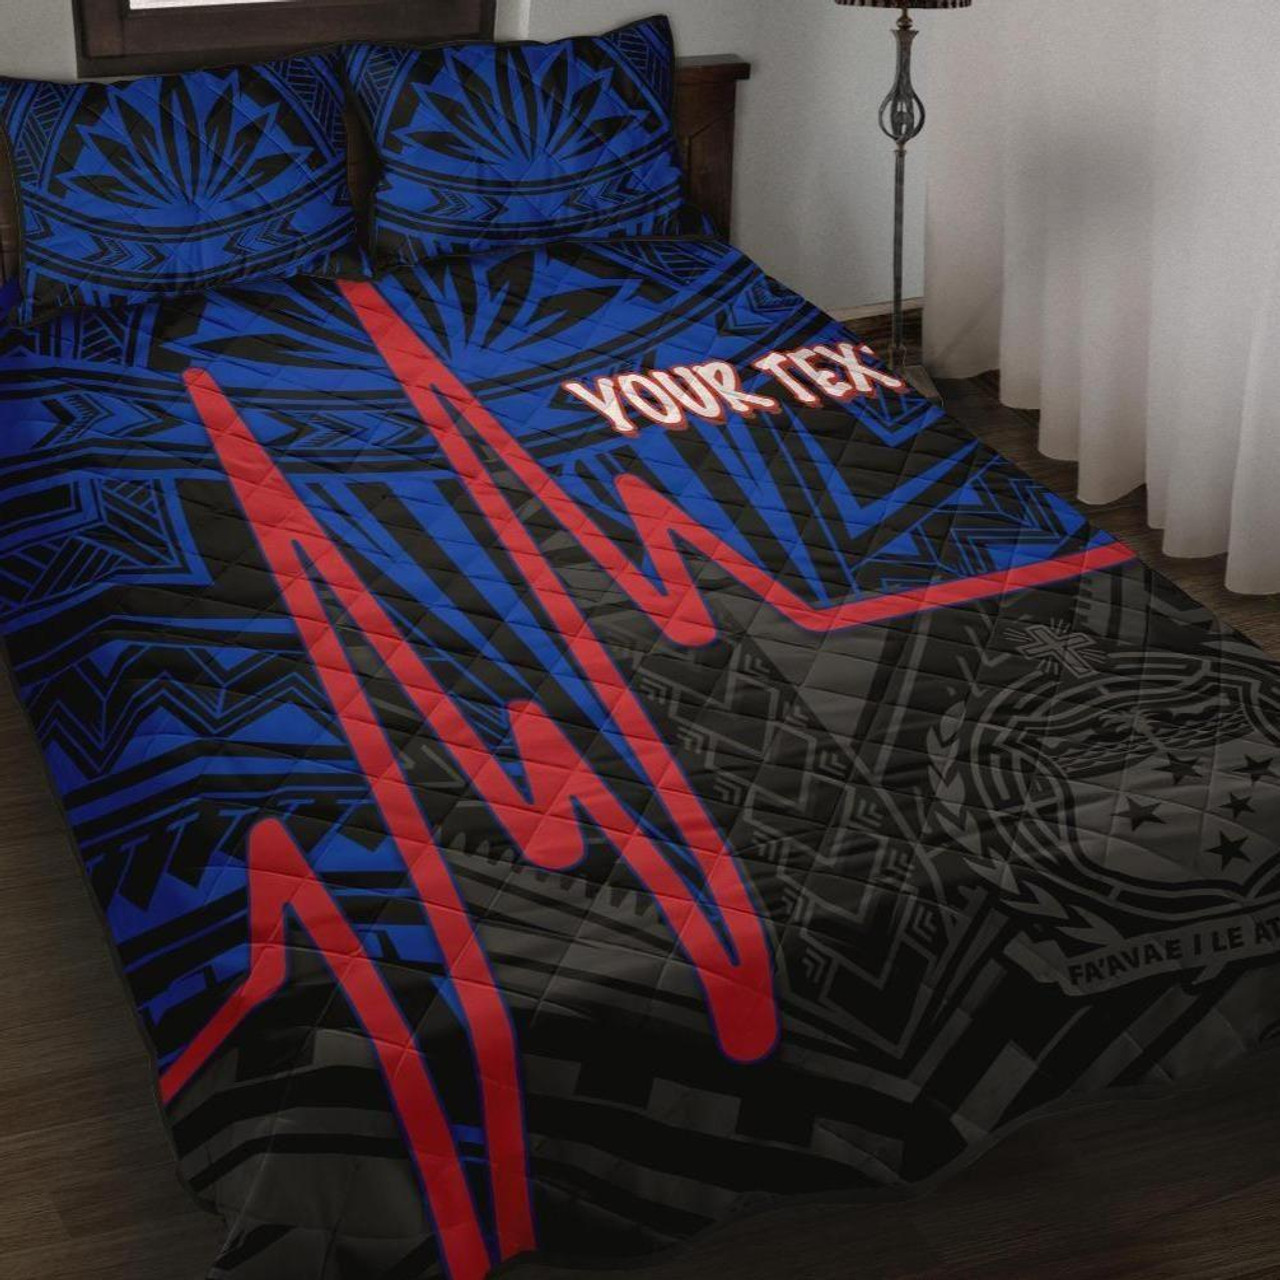 Samoa Personalised Quilt Bed Set - Samoa Seal With Polynesian Patterns In Heartbeat Style(Blue) 1